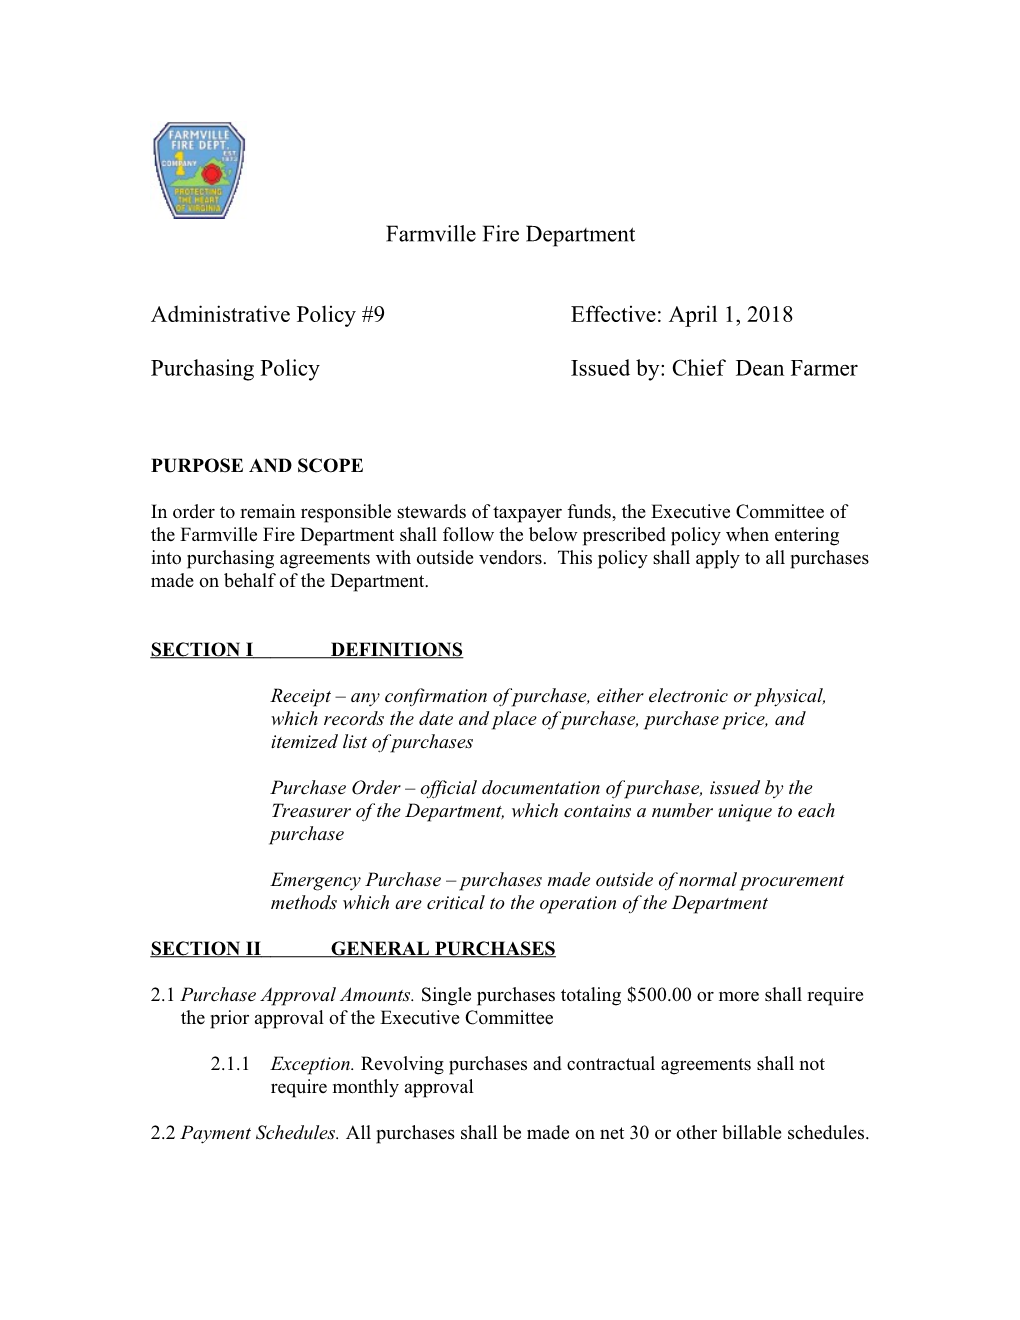 Proposed Fire Department Purchasing Policy